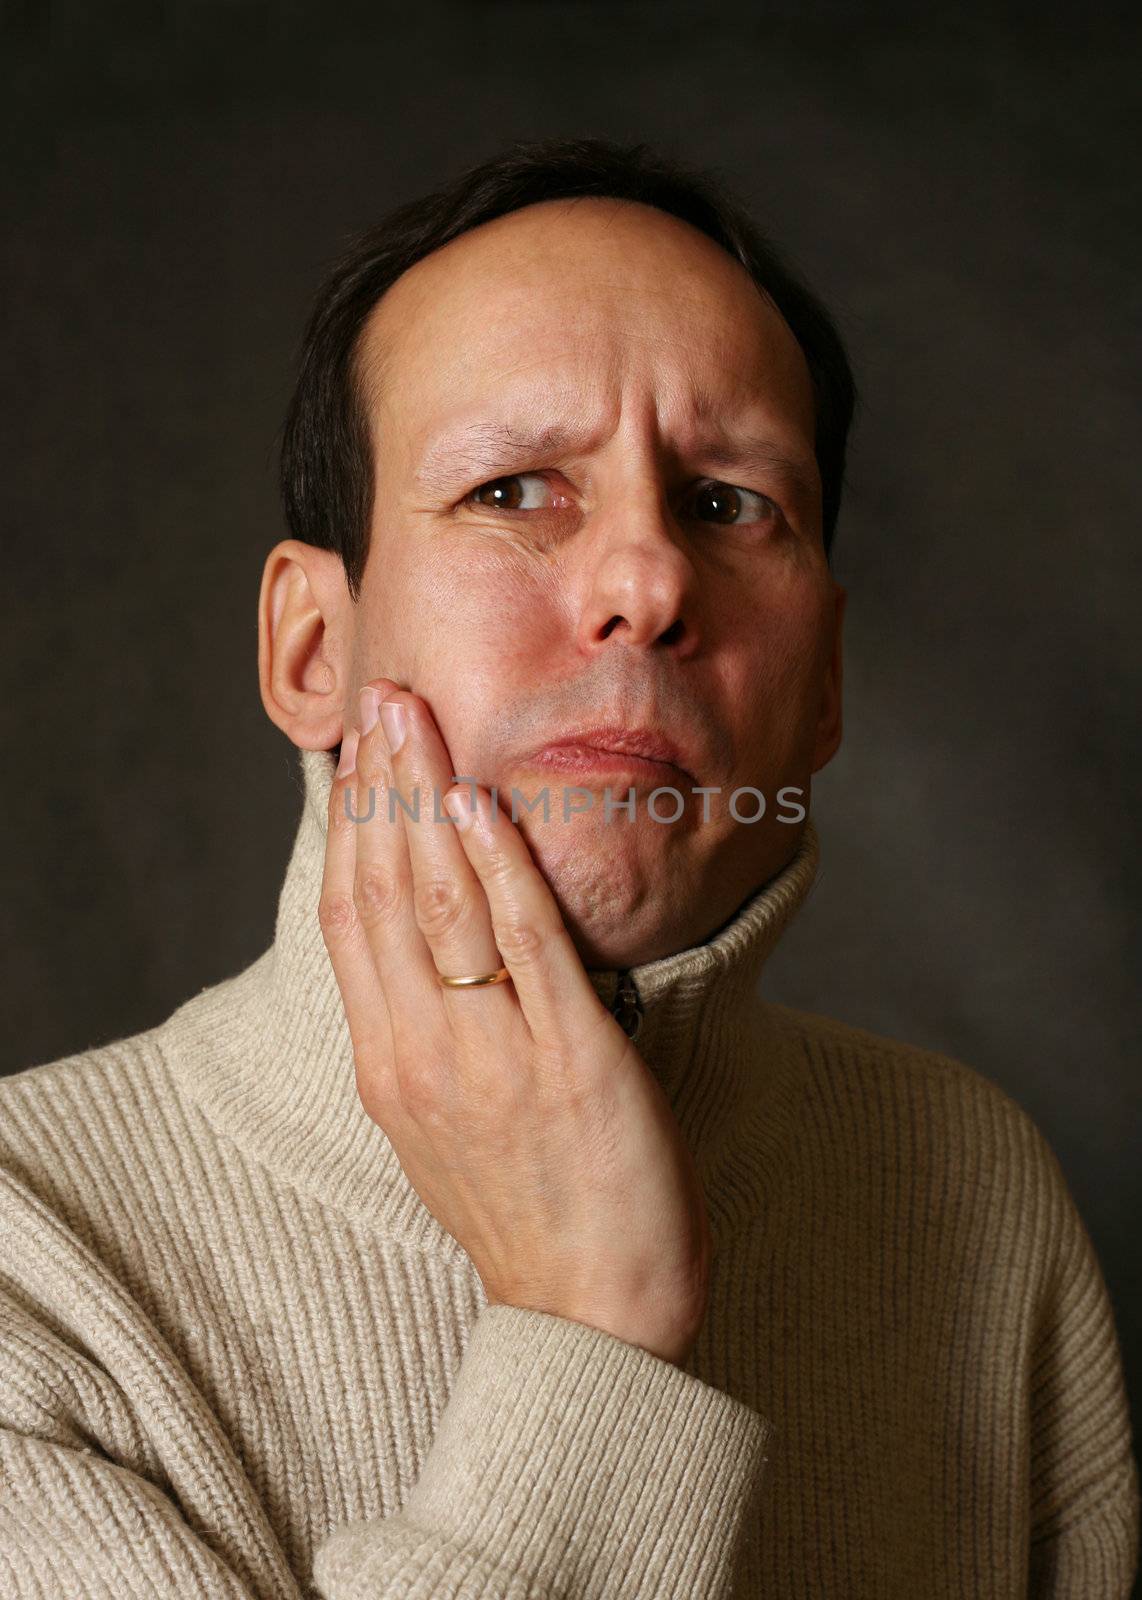 Adult man with toothache on dark background